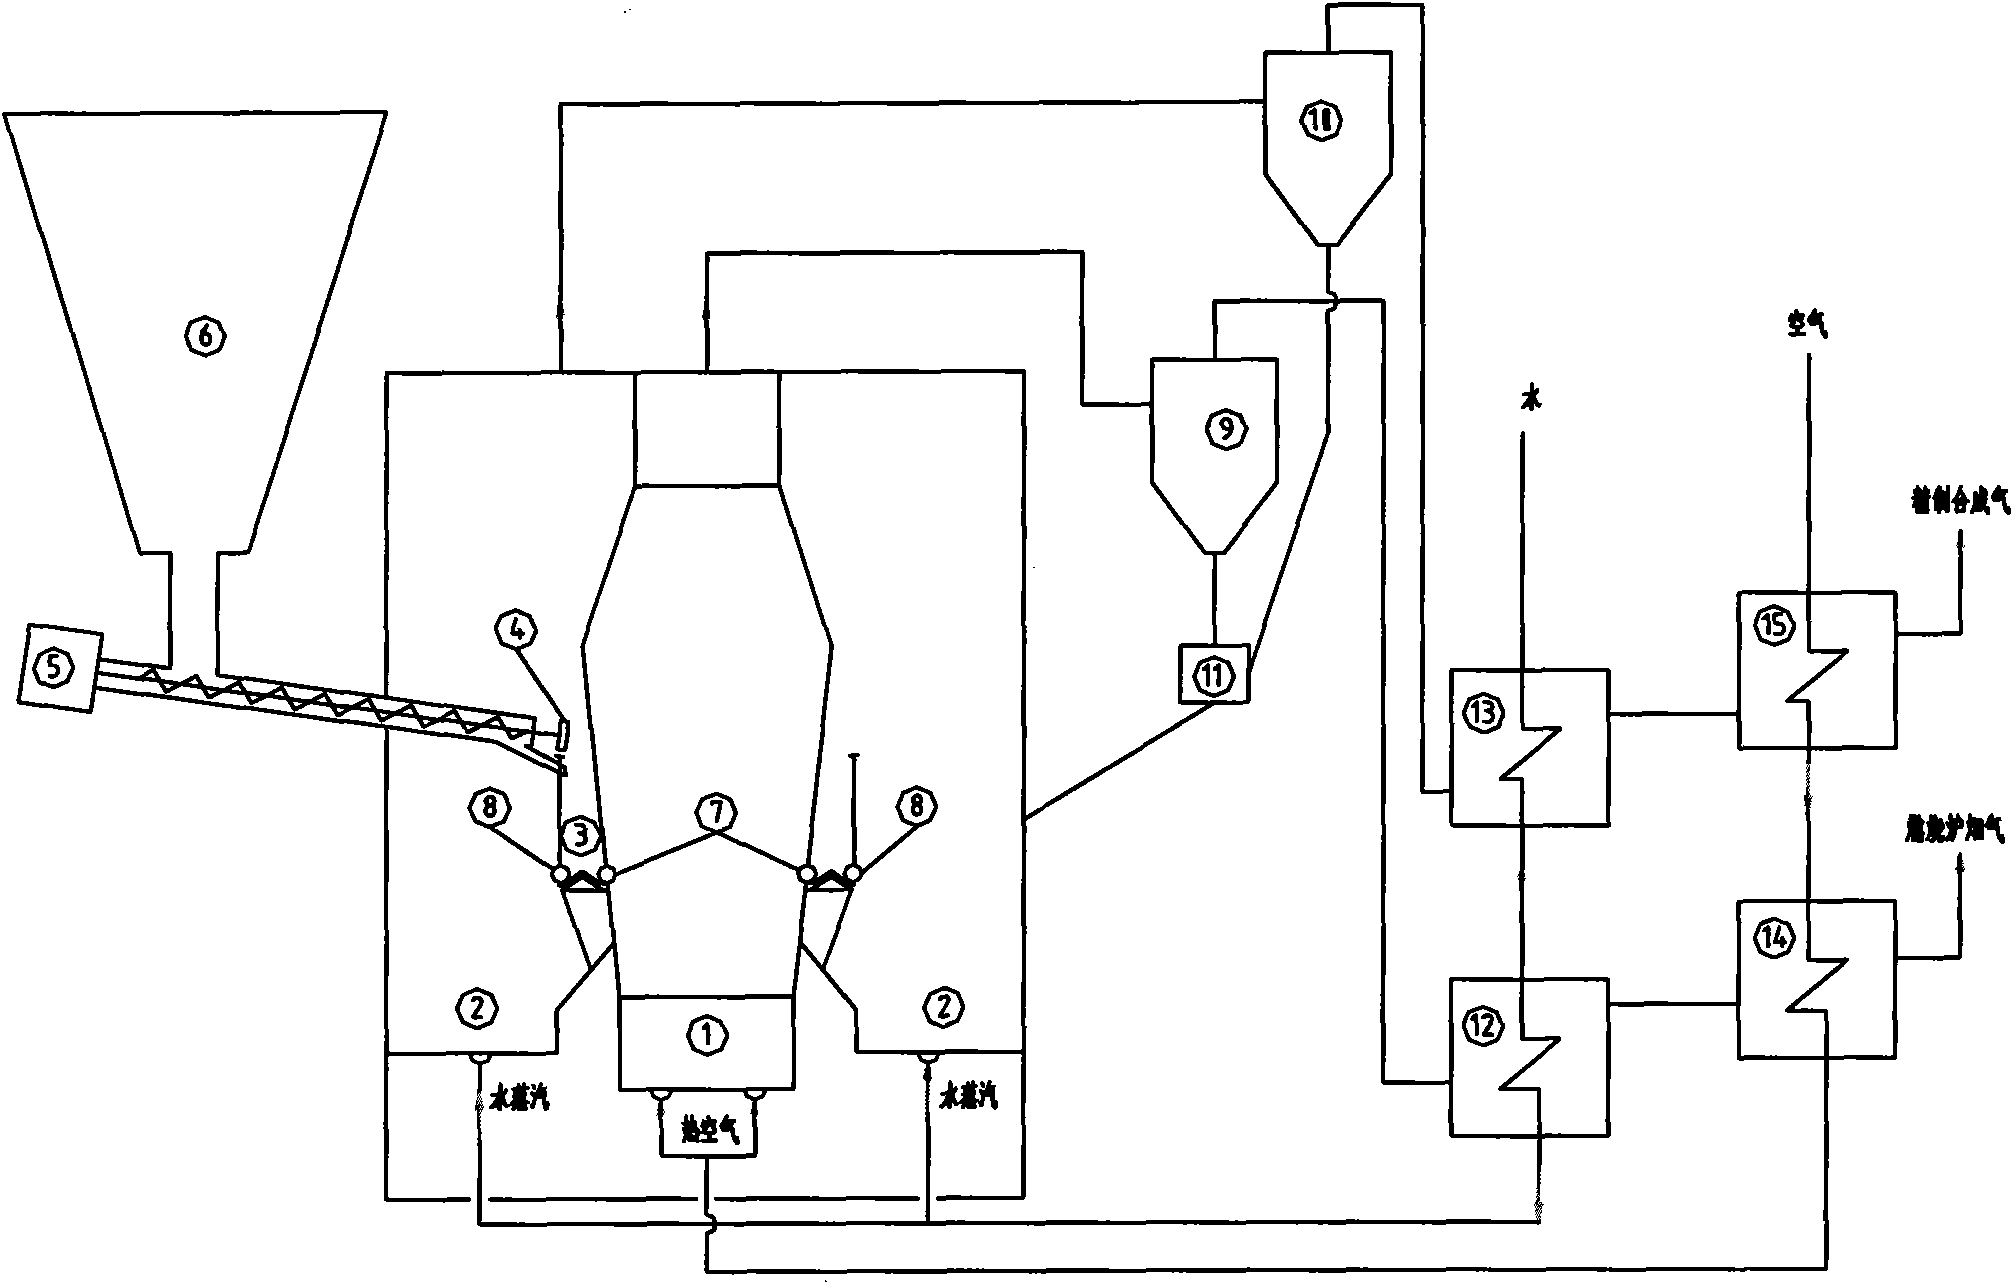 Method and device for producing syngas by combustion and gasification of double cylinders